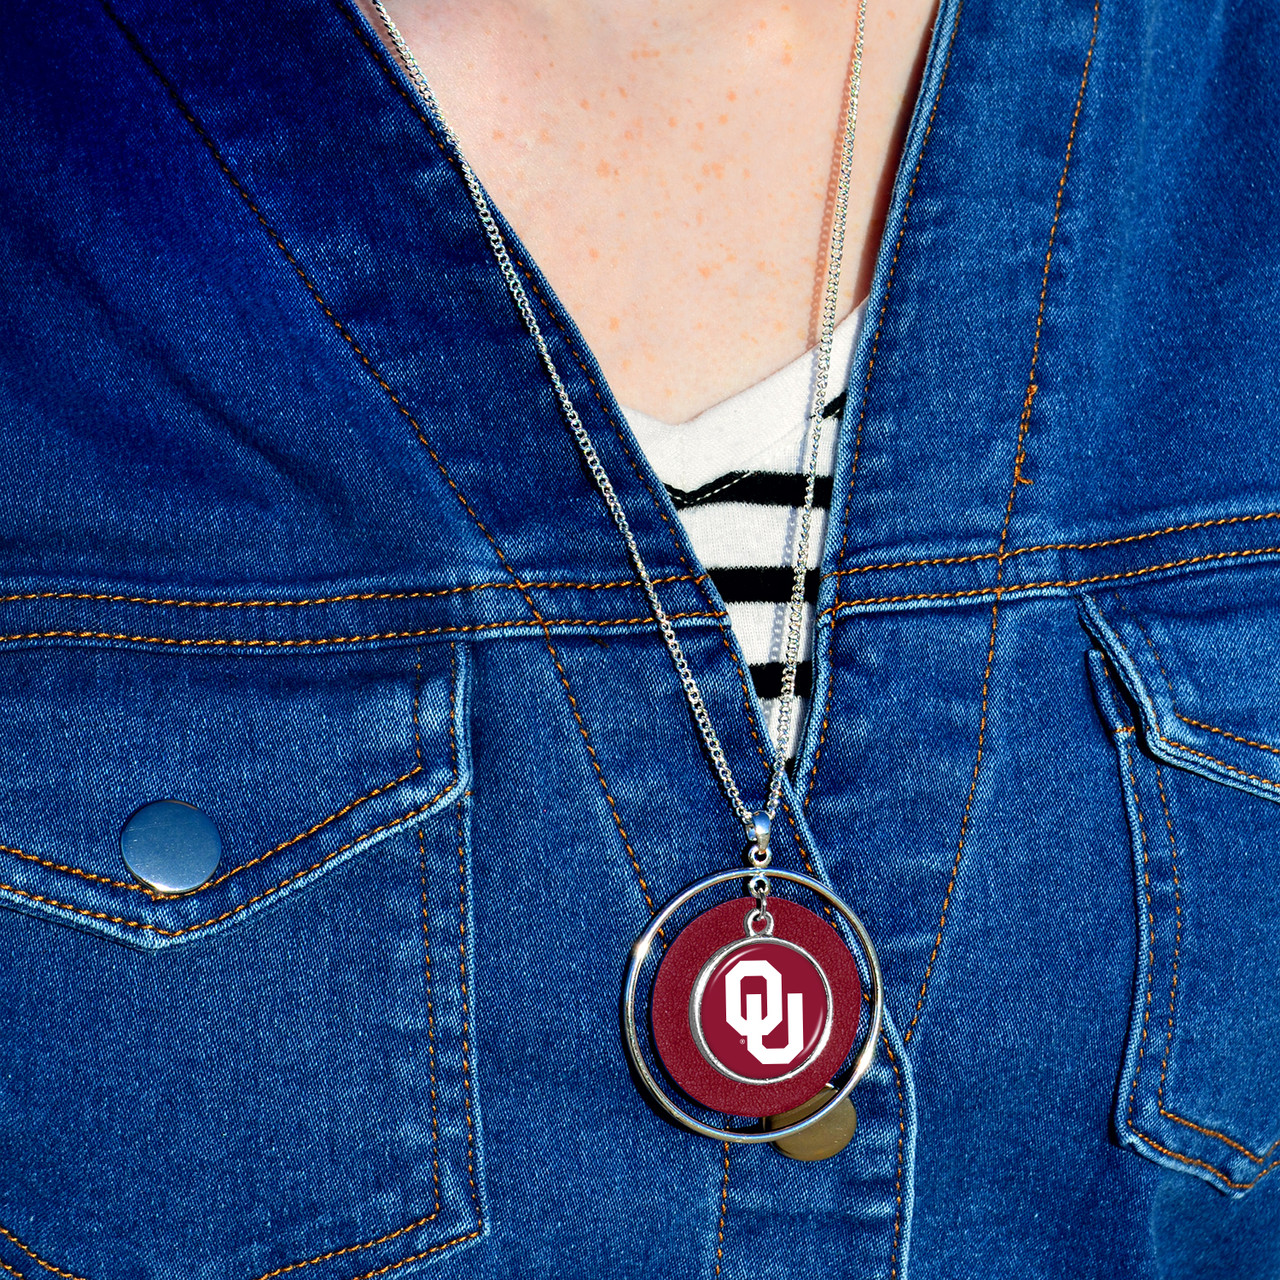 Oklahoma Sooners Necklace- Lindy